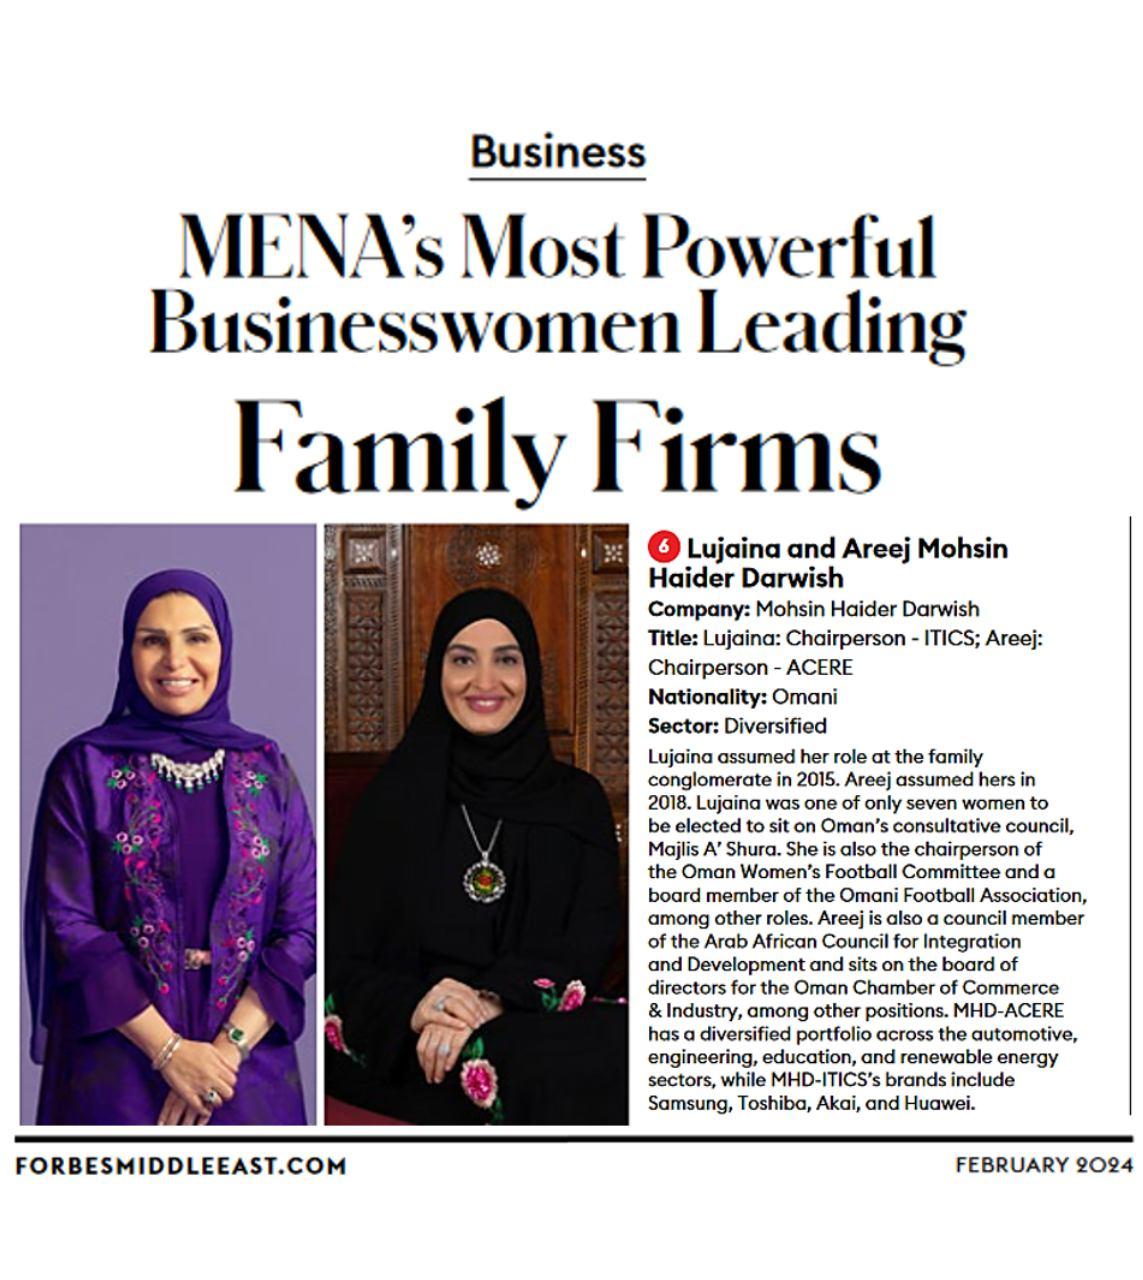 Forbes Top 10 Most Powerful Businesswomen leading Family Businesses